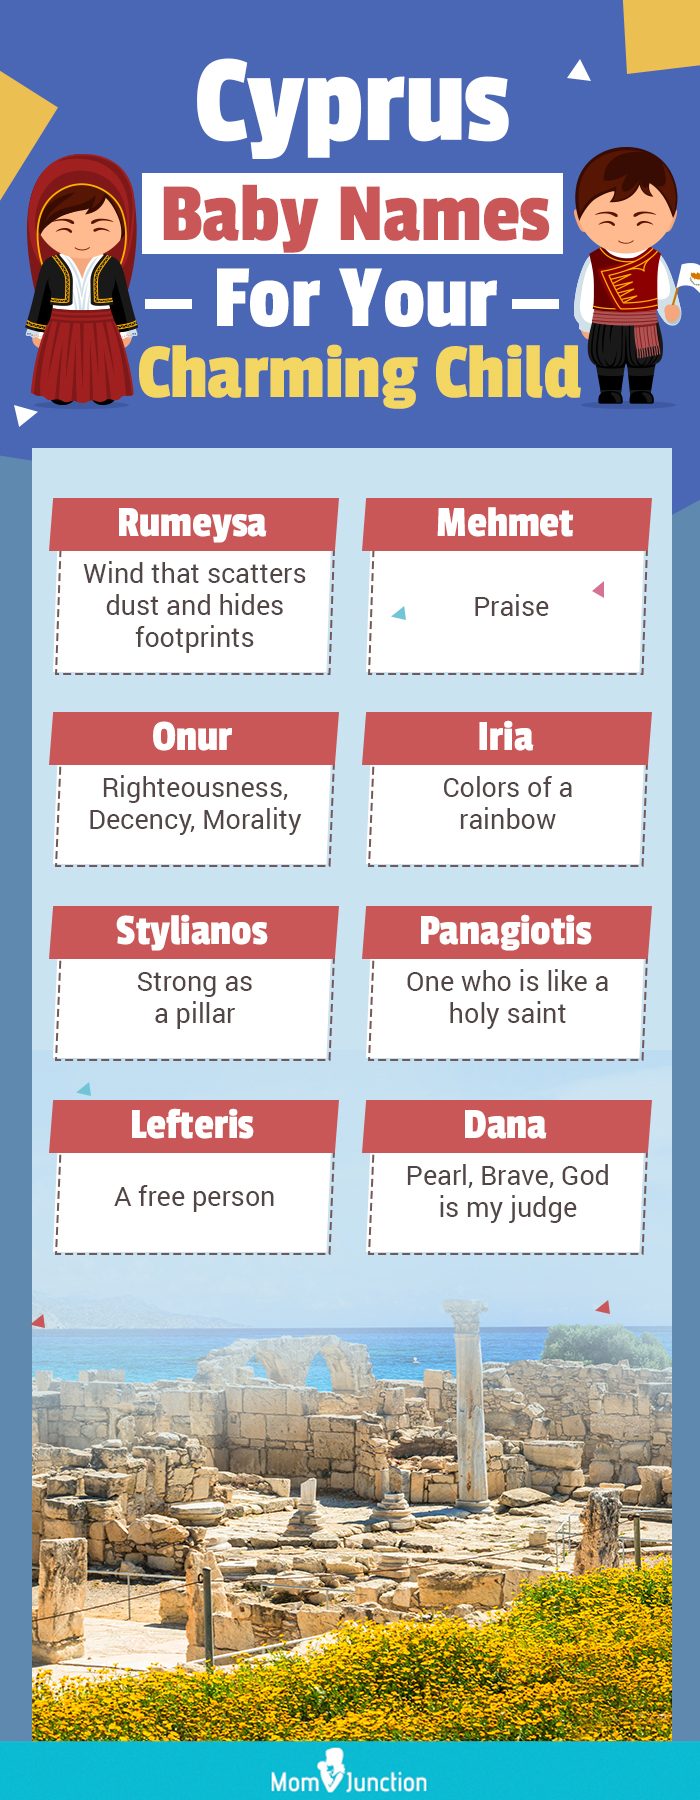 cyprus baby names for your charming child (infographic)